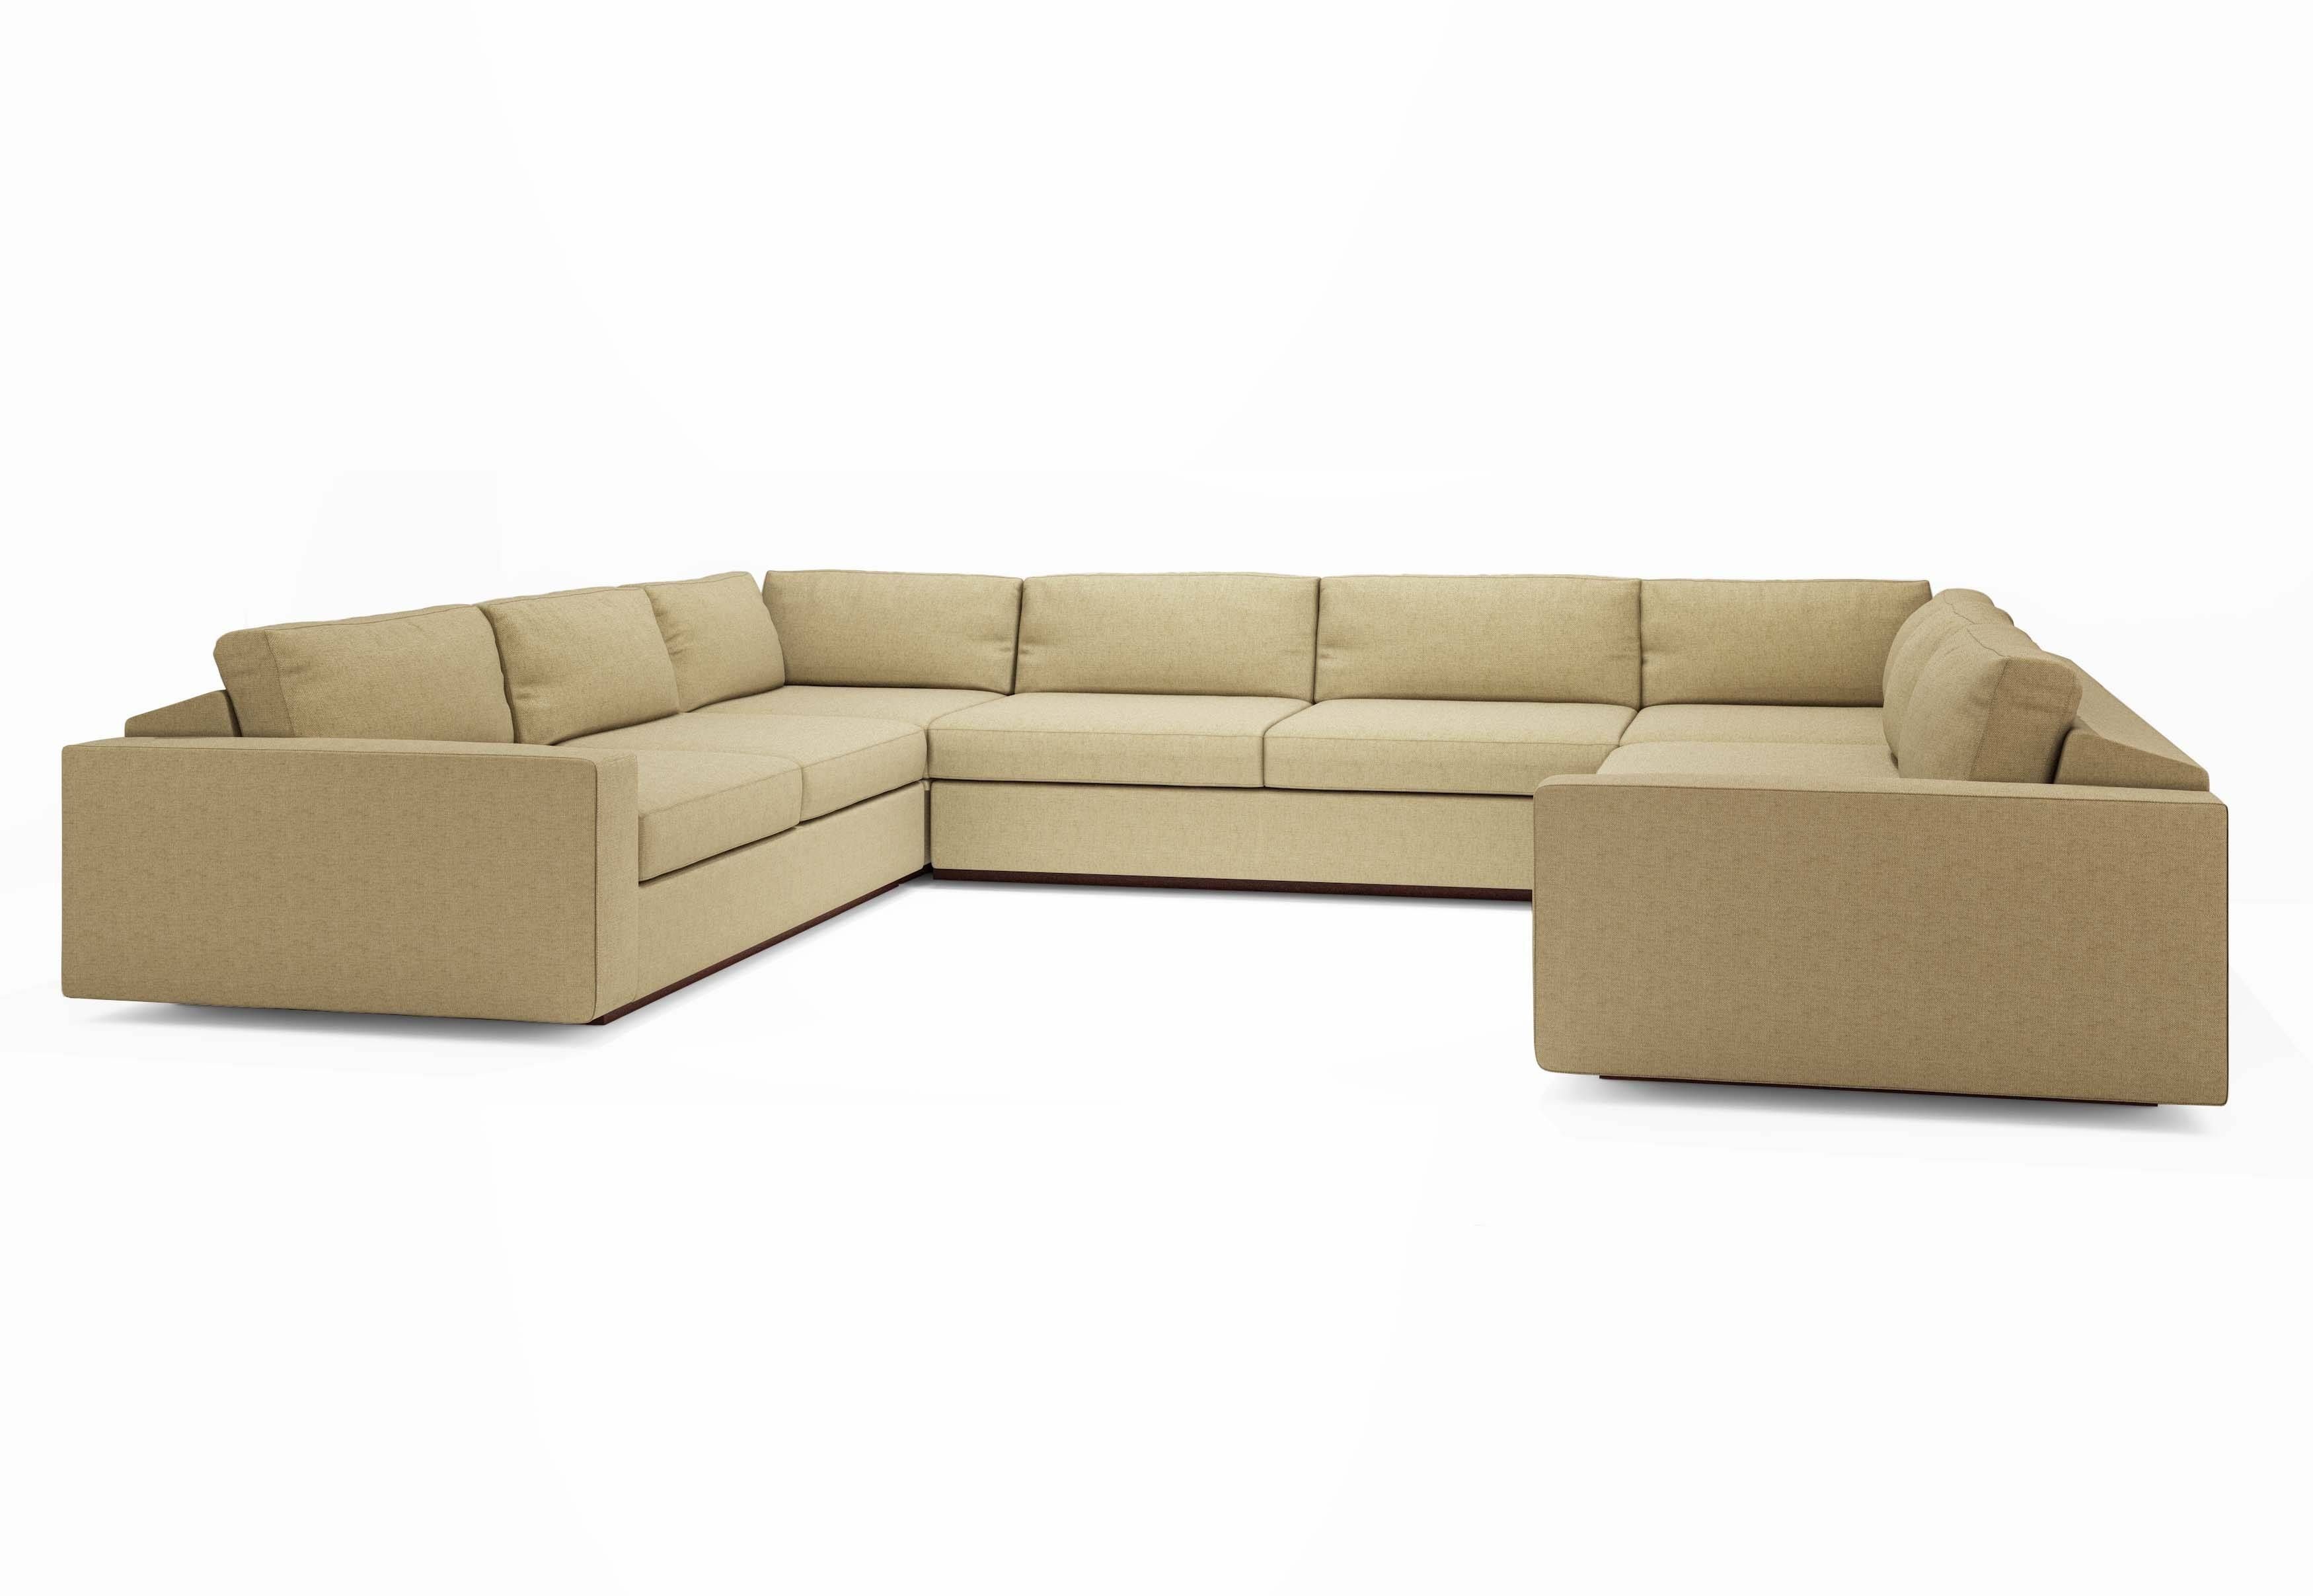 Nice Cream Fabric Sectional Pieces L Shaped Couch — Liberty In L Shaped Fabric Sofas (View 17 of 30)